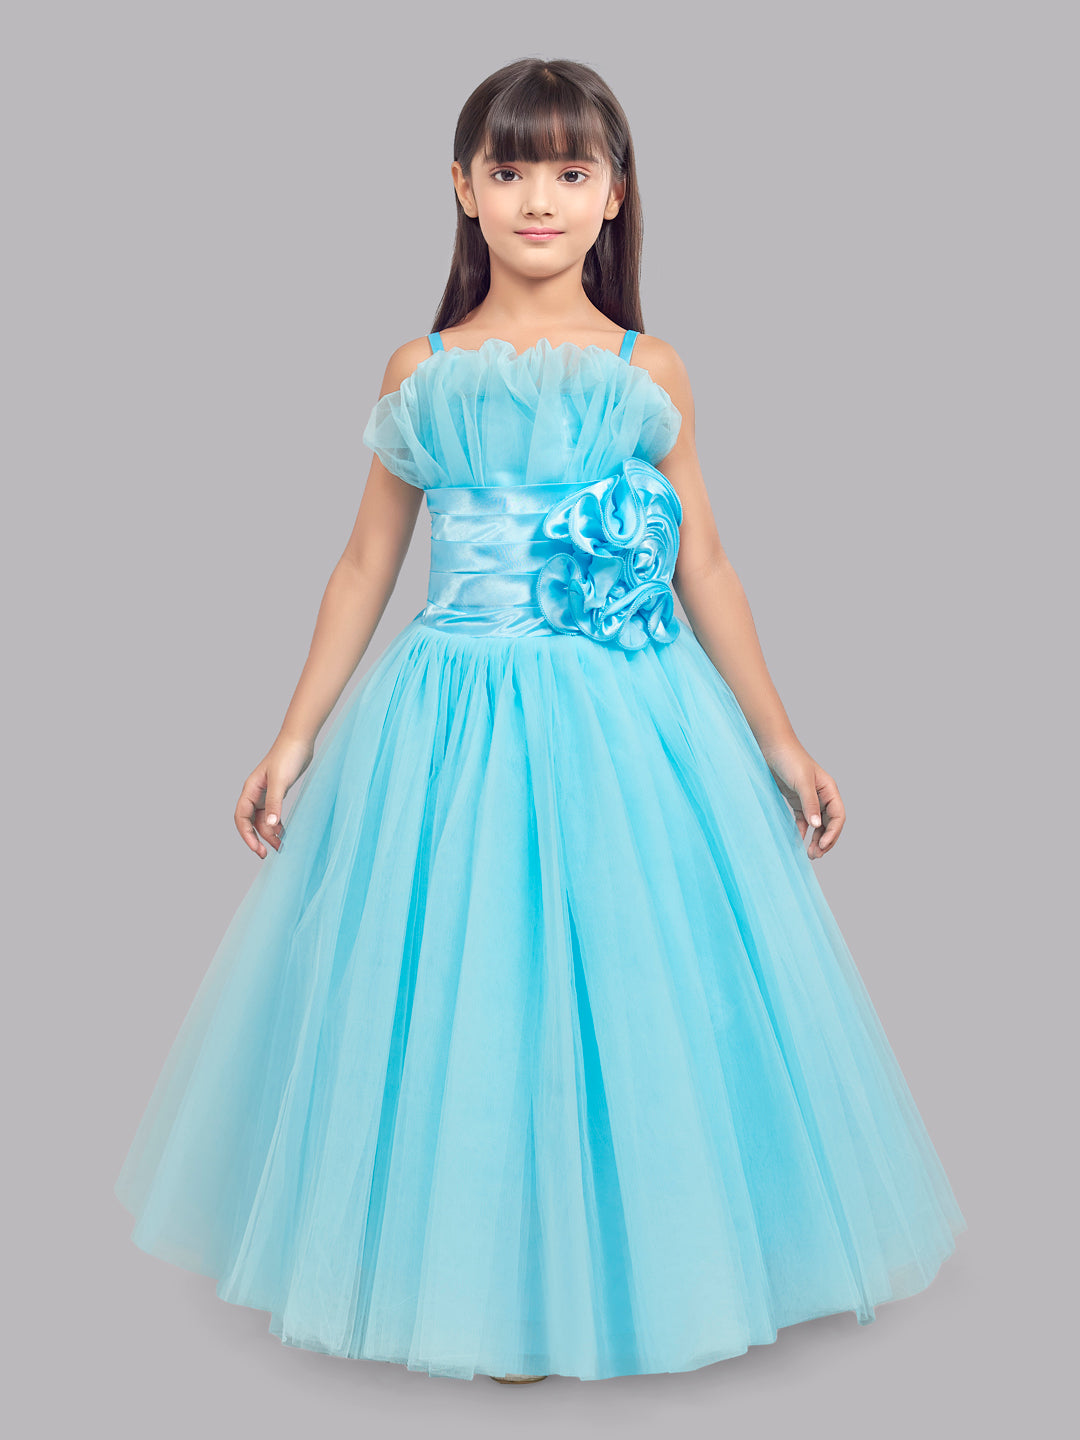 HVM Baby Girl Party Wear Frock (6-12M, 12-18M, 18-24M, 2-3Y, 3-4Y, 4-5Y) -  Online Shopping Site in India for Kids Clothing I Kids Footwear I Baby  Clothing I Fashion Accessories I Boys